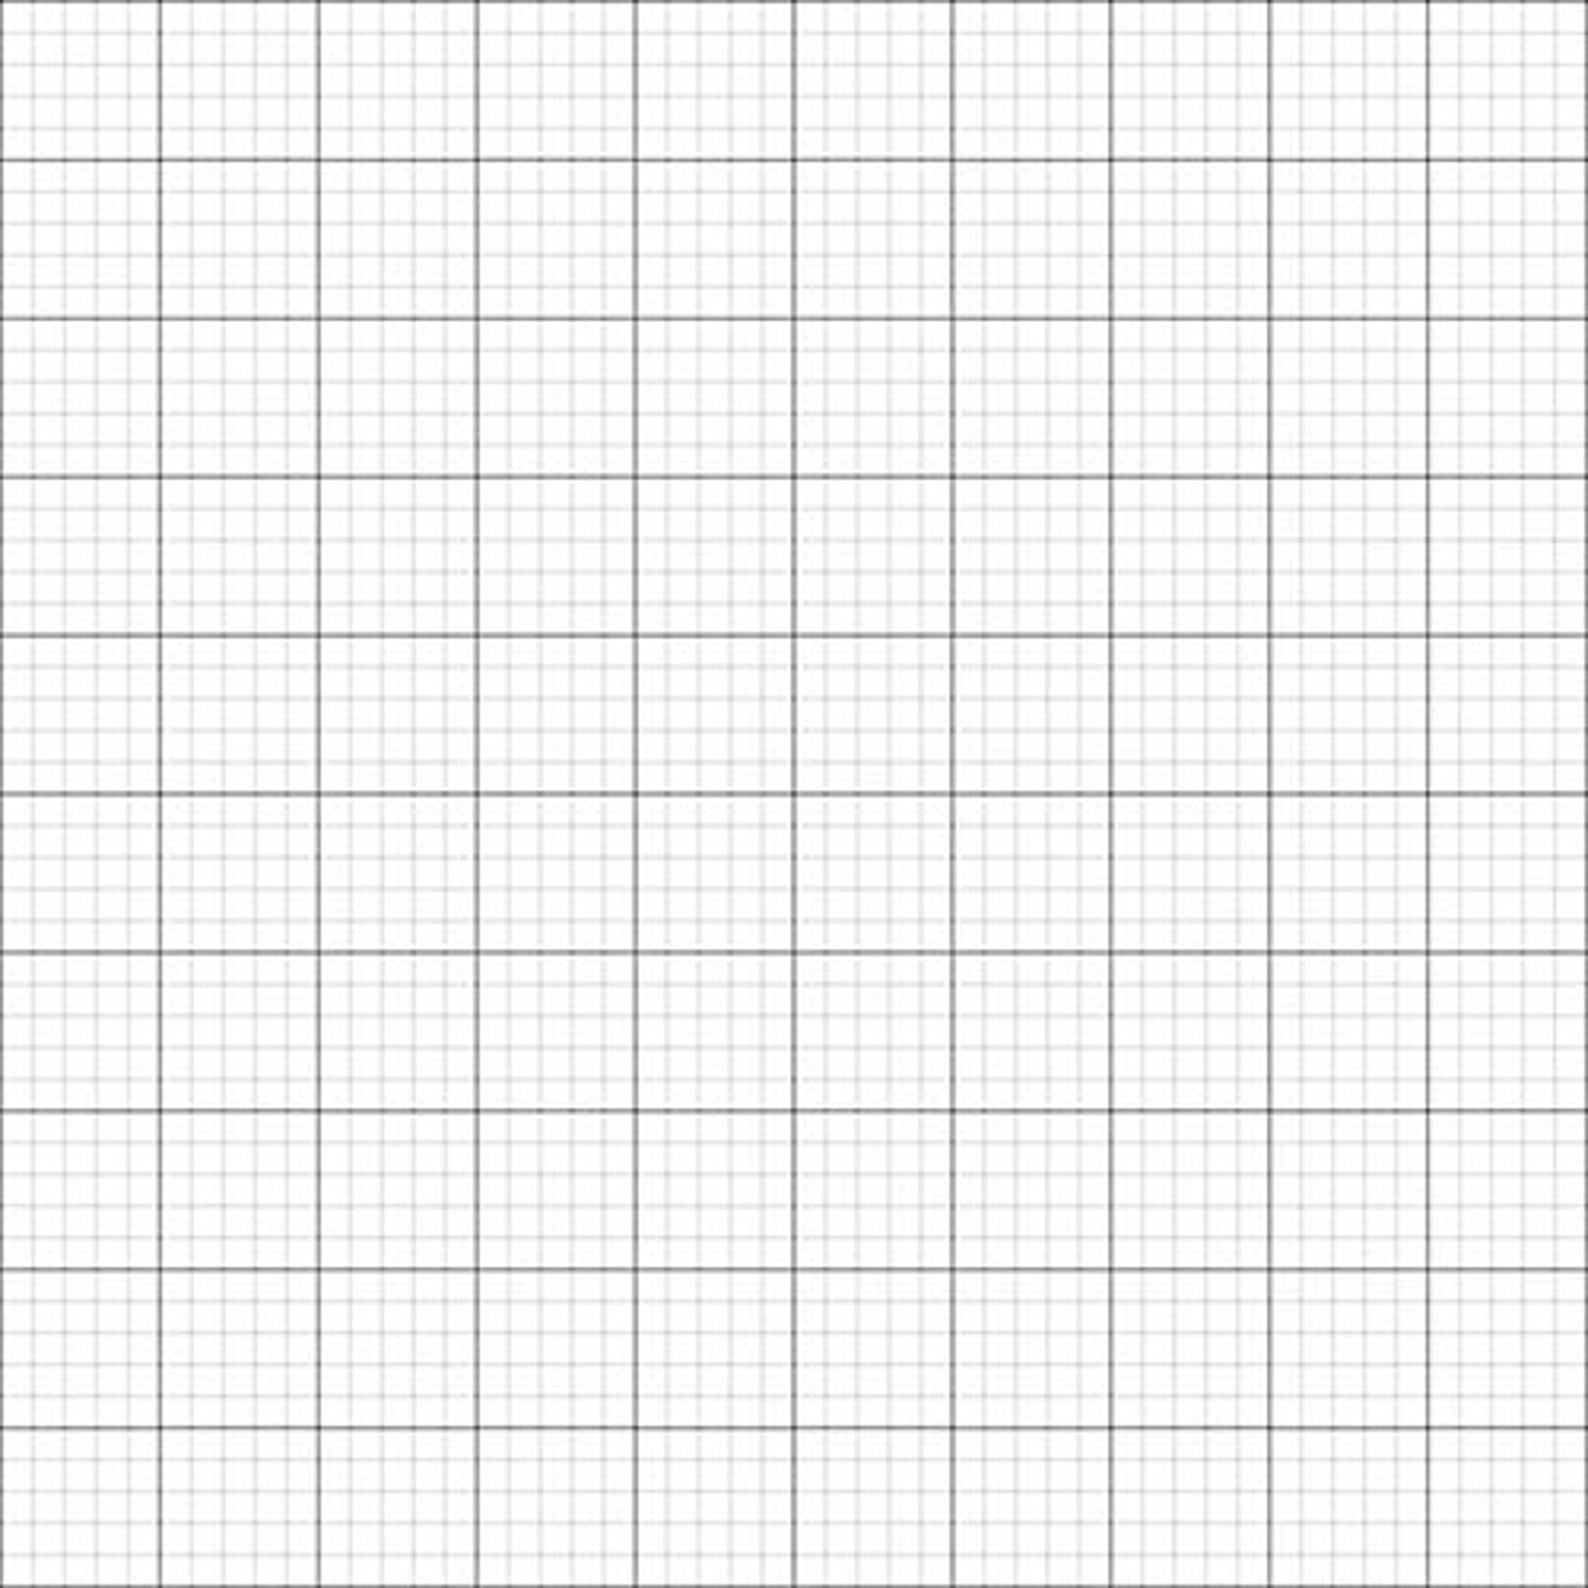 grid-graph-paper-a0-a1-a21-size-metric-1mm-5mm-50mm-etsy-uk